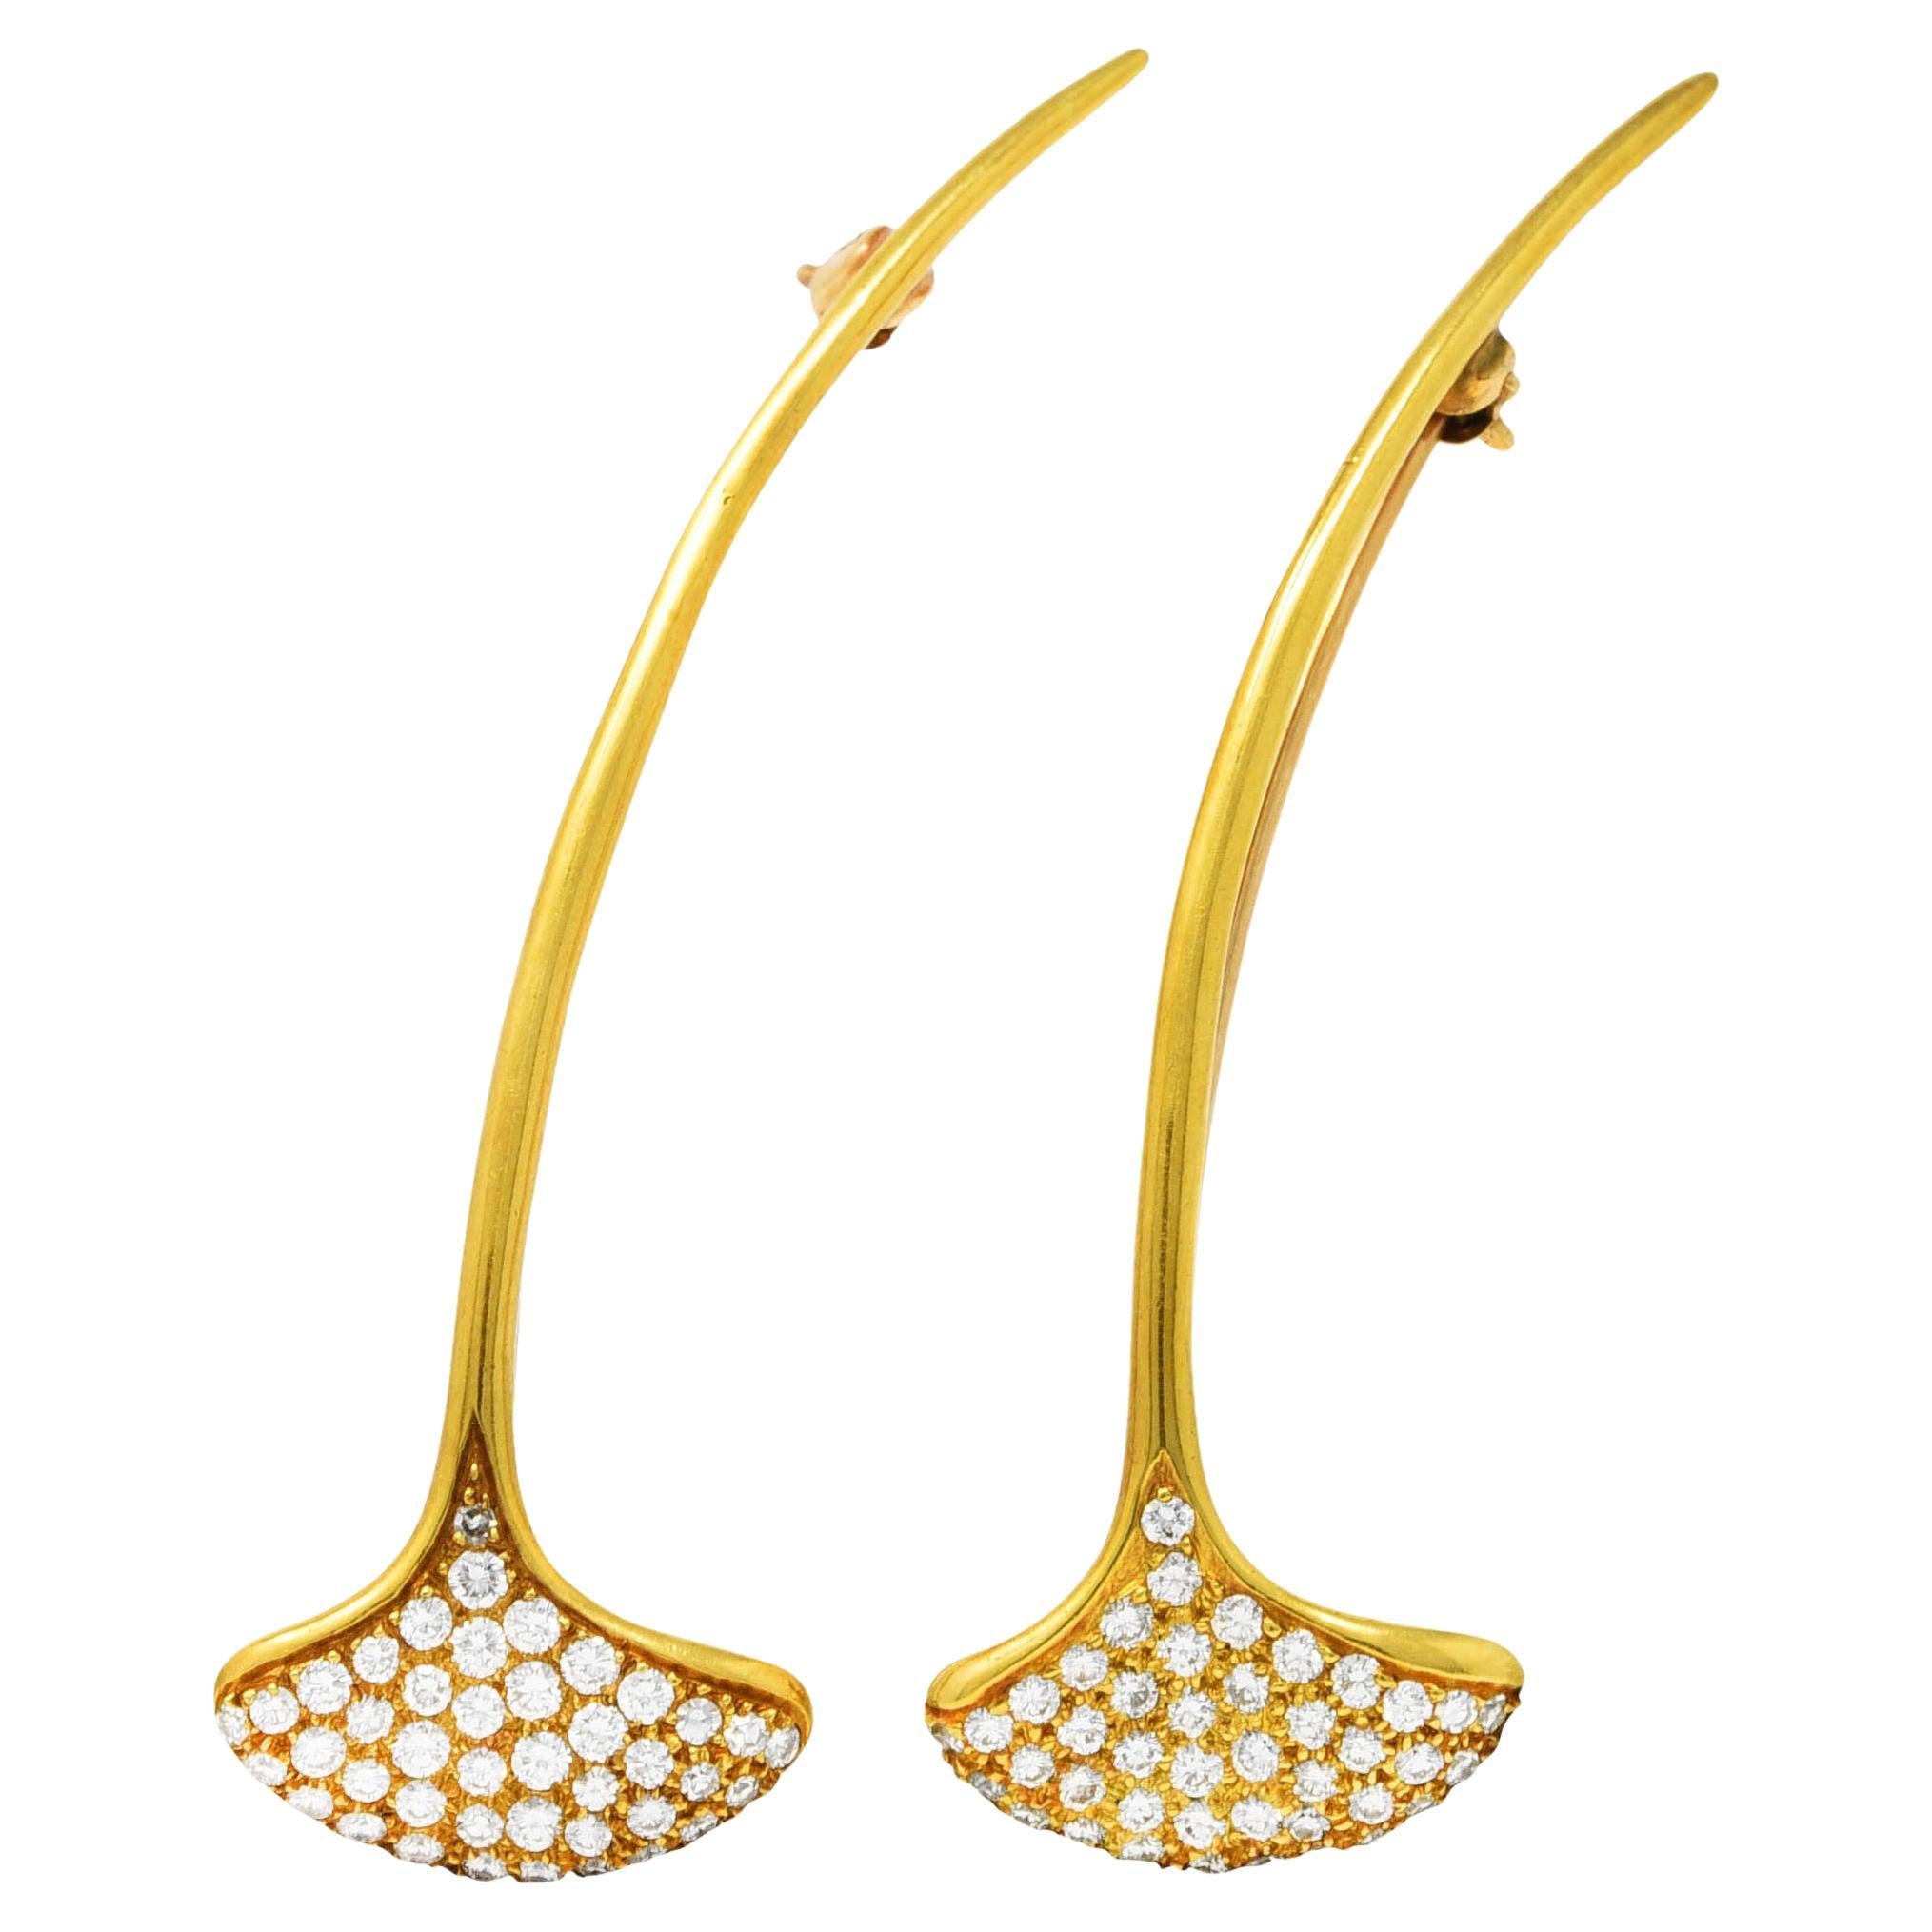 Set of linear bar brooches designed as stylized ginkgo leaves with an elongated polished gold stem. Leaves are pavè set with round brilliant cut diamonds. Weighing in total approximately 1.00 carat - F color with VS clarity. Both completed by a pin